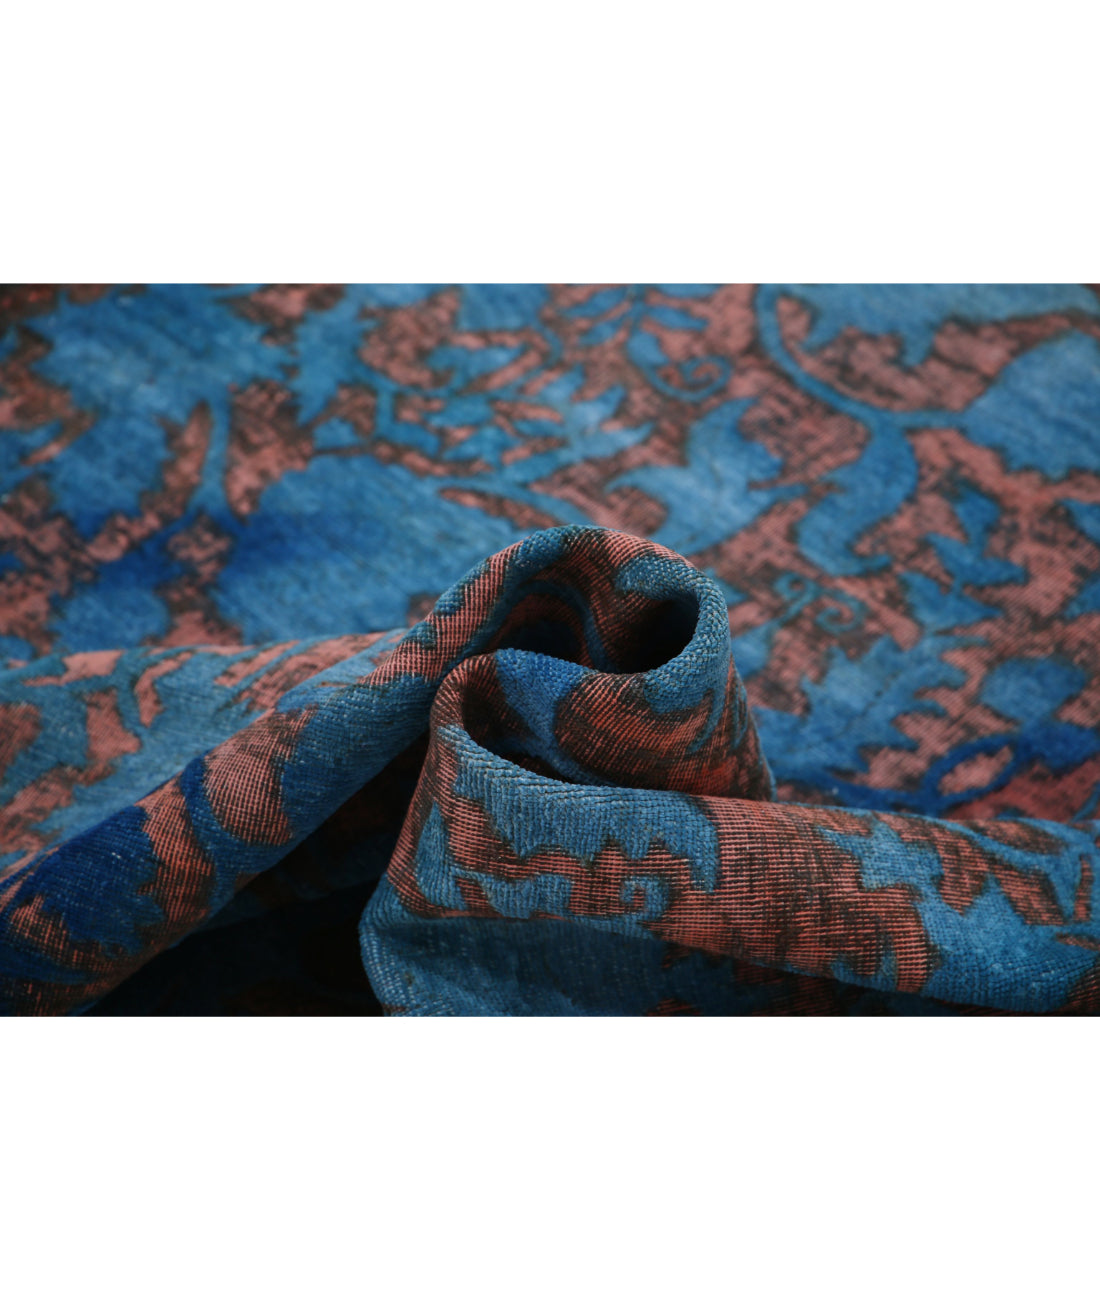 Hand Knotted Onyx Wool Rug - 10'0'' x 13'2'' 10'0'' x 13'2'' (300 X 395) / Teal / Teal